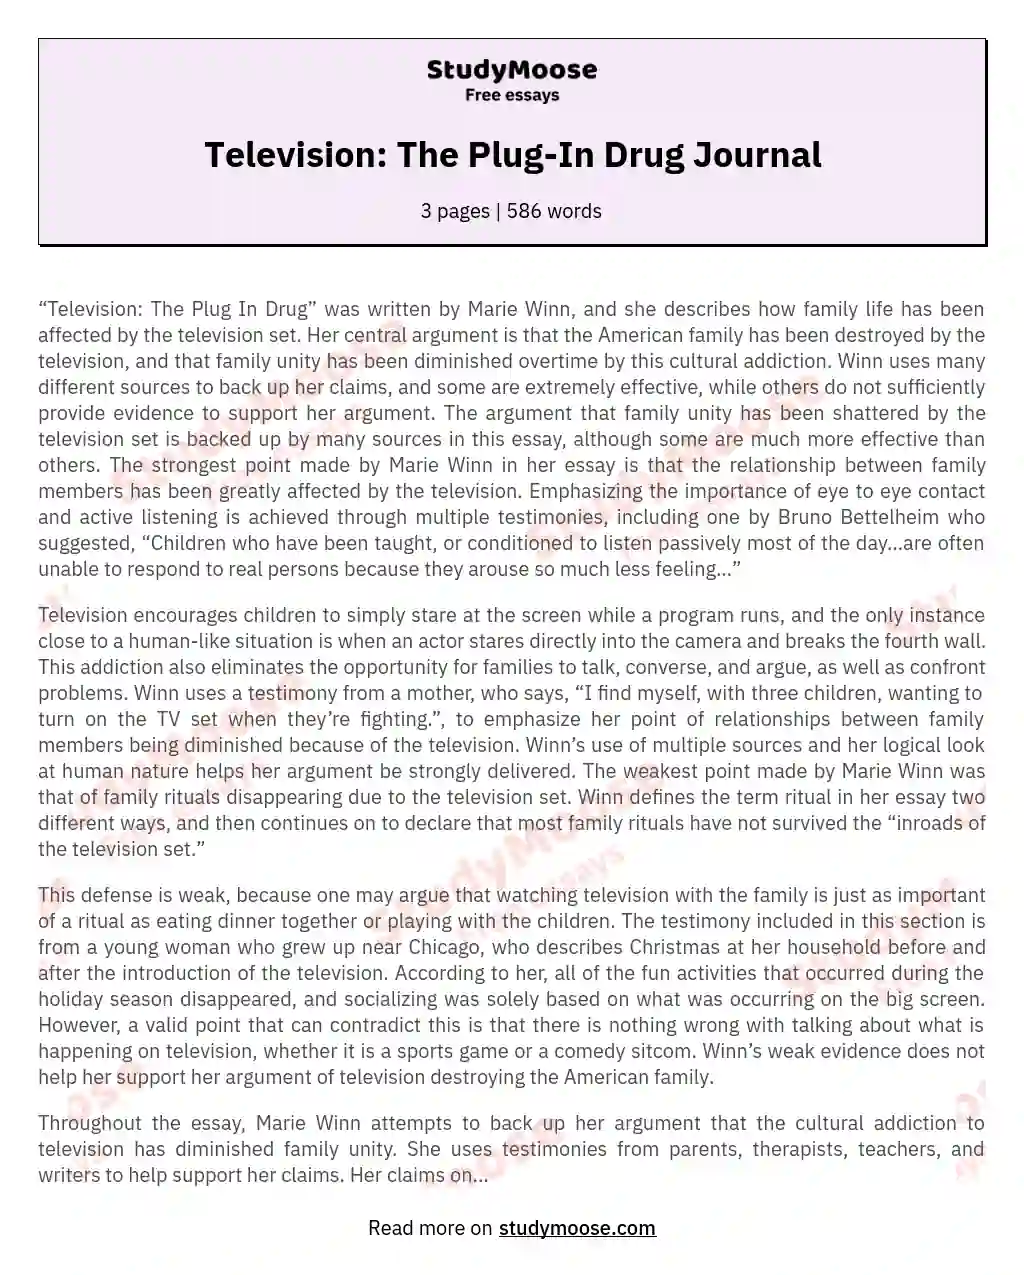 Television: The Plug-In Drug Journal essay